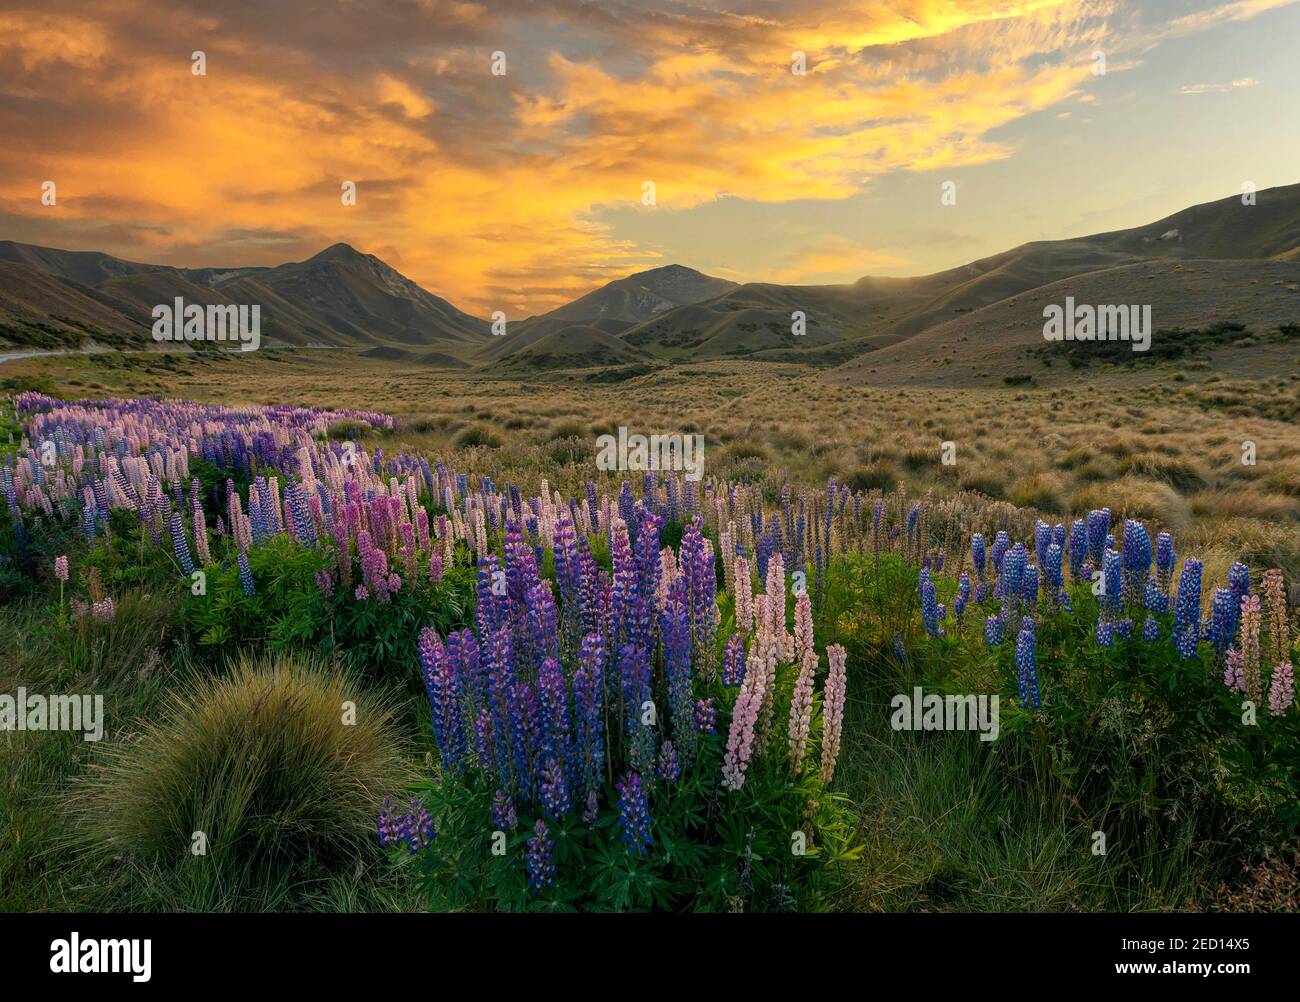 Variegated multifoliate lupines (Lupinus polyphyllus) in mountain landscape, Lindis Pass, sunset, Southern Alps, Otago, South Island, New Zealand Stock Photo